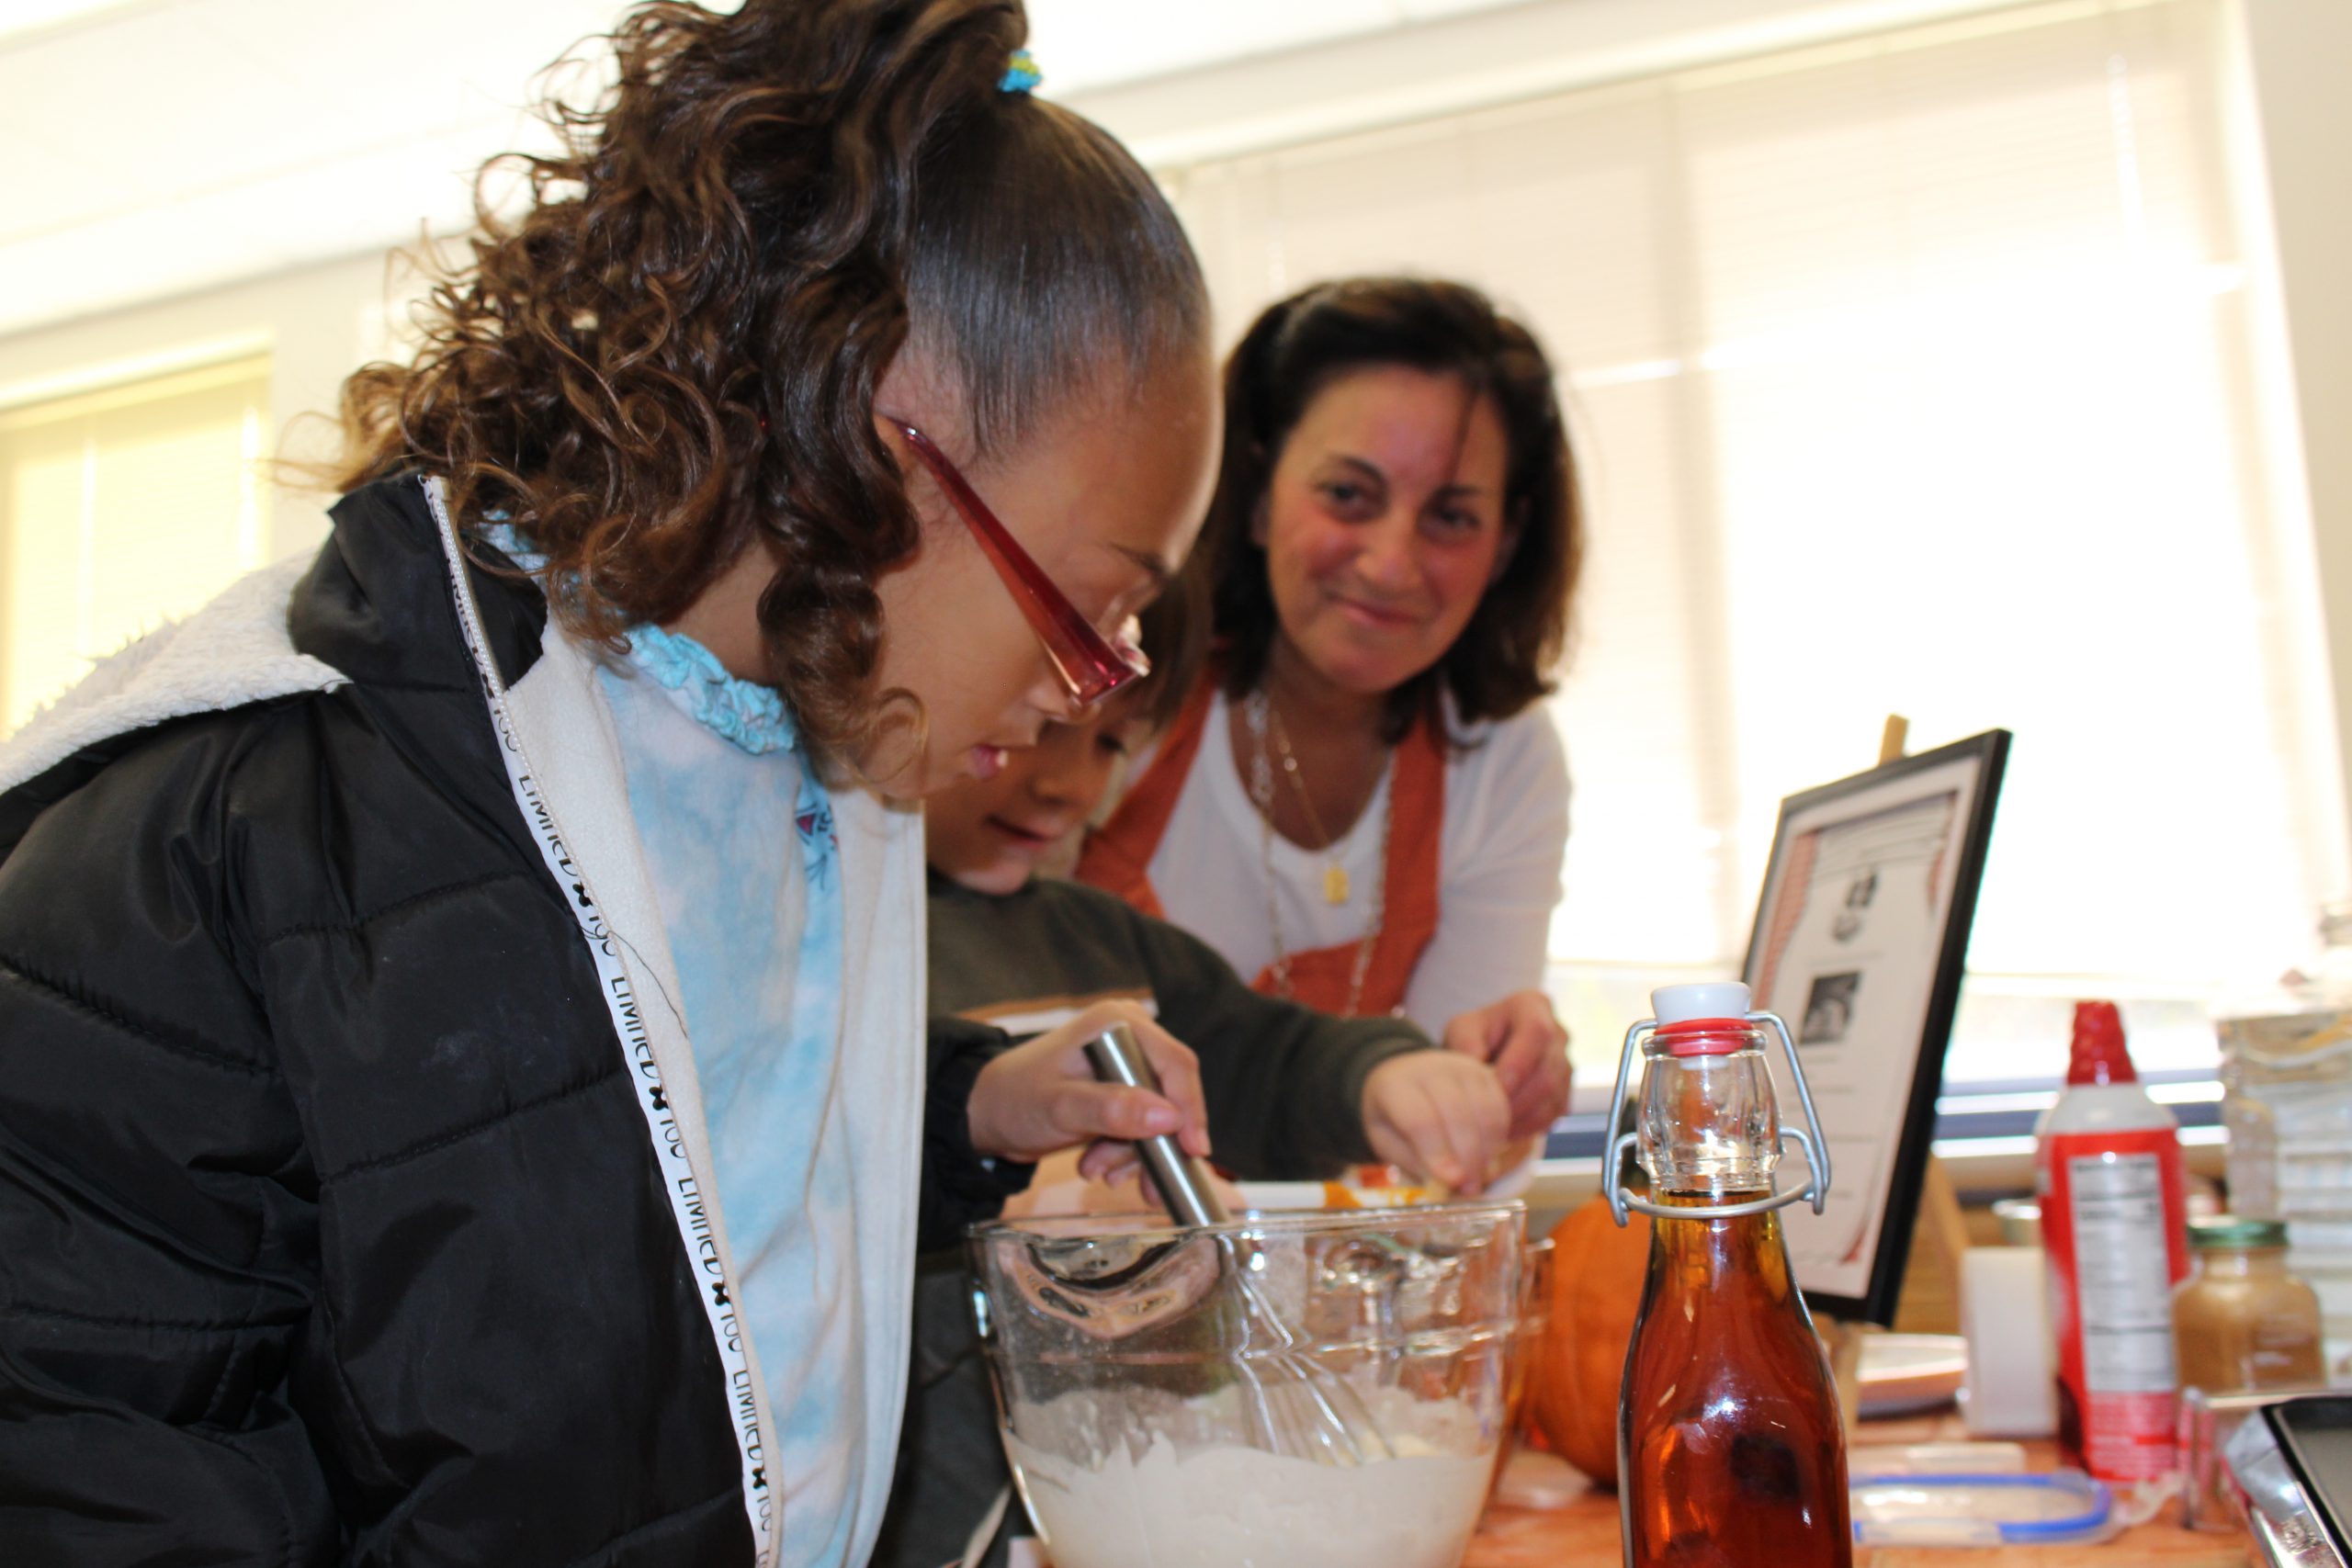 two young girls are mixing ingredients together at a table as a smiling woman looks on